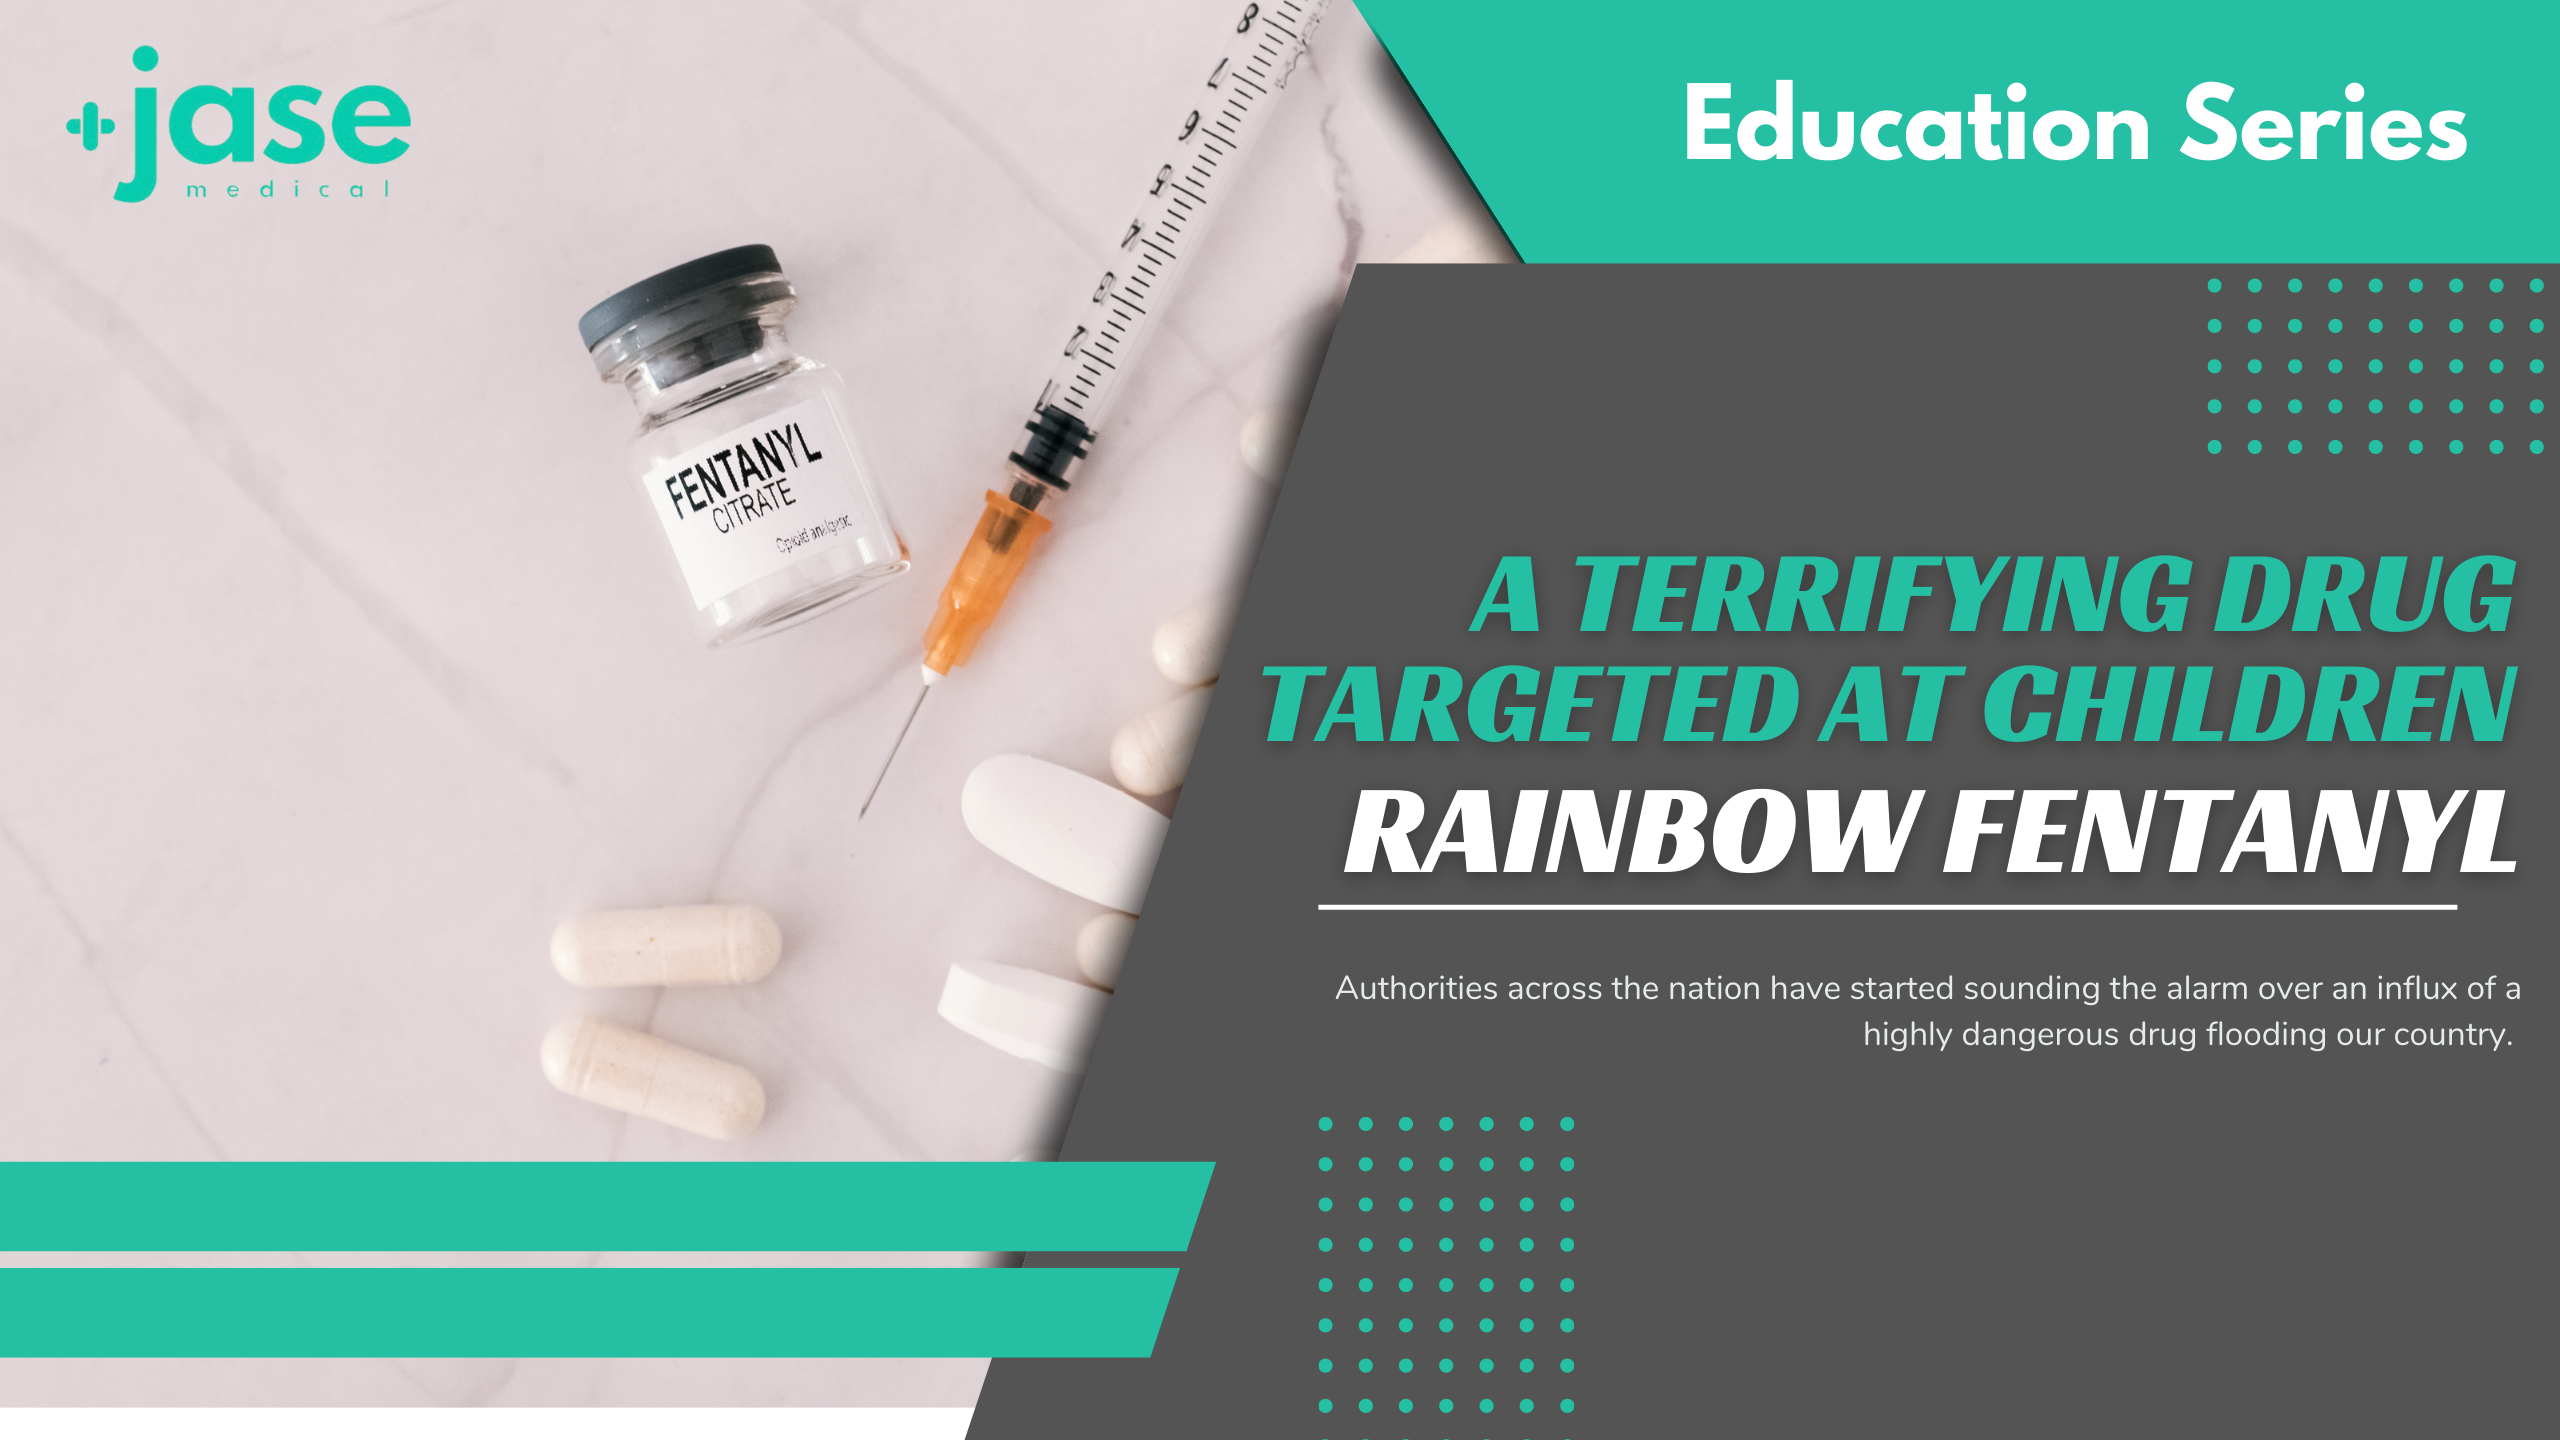 A Terrifying Drug Targeted at Children- Rainbow Fentanyl